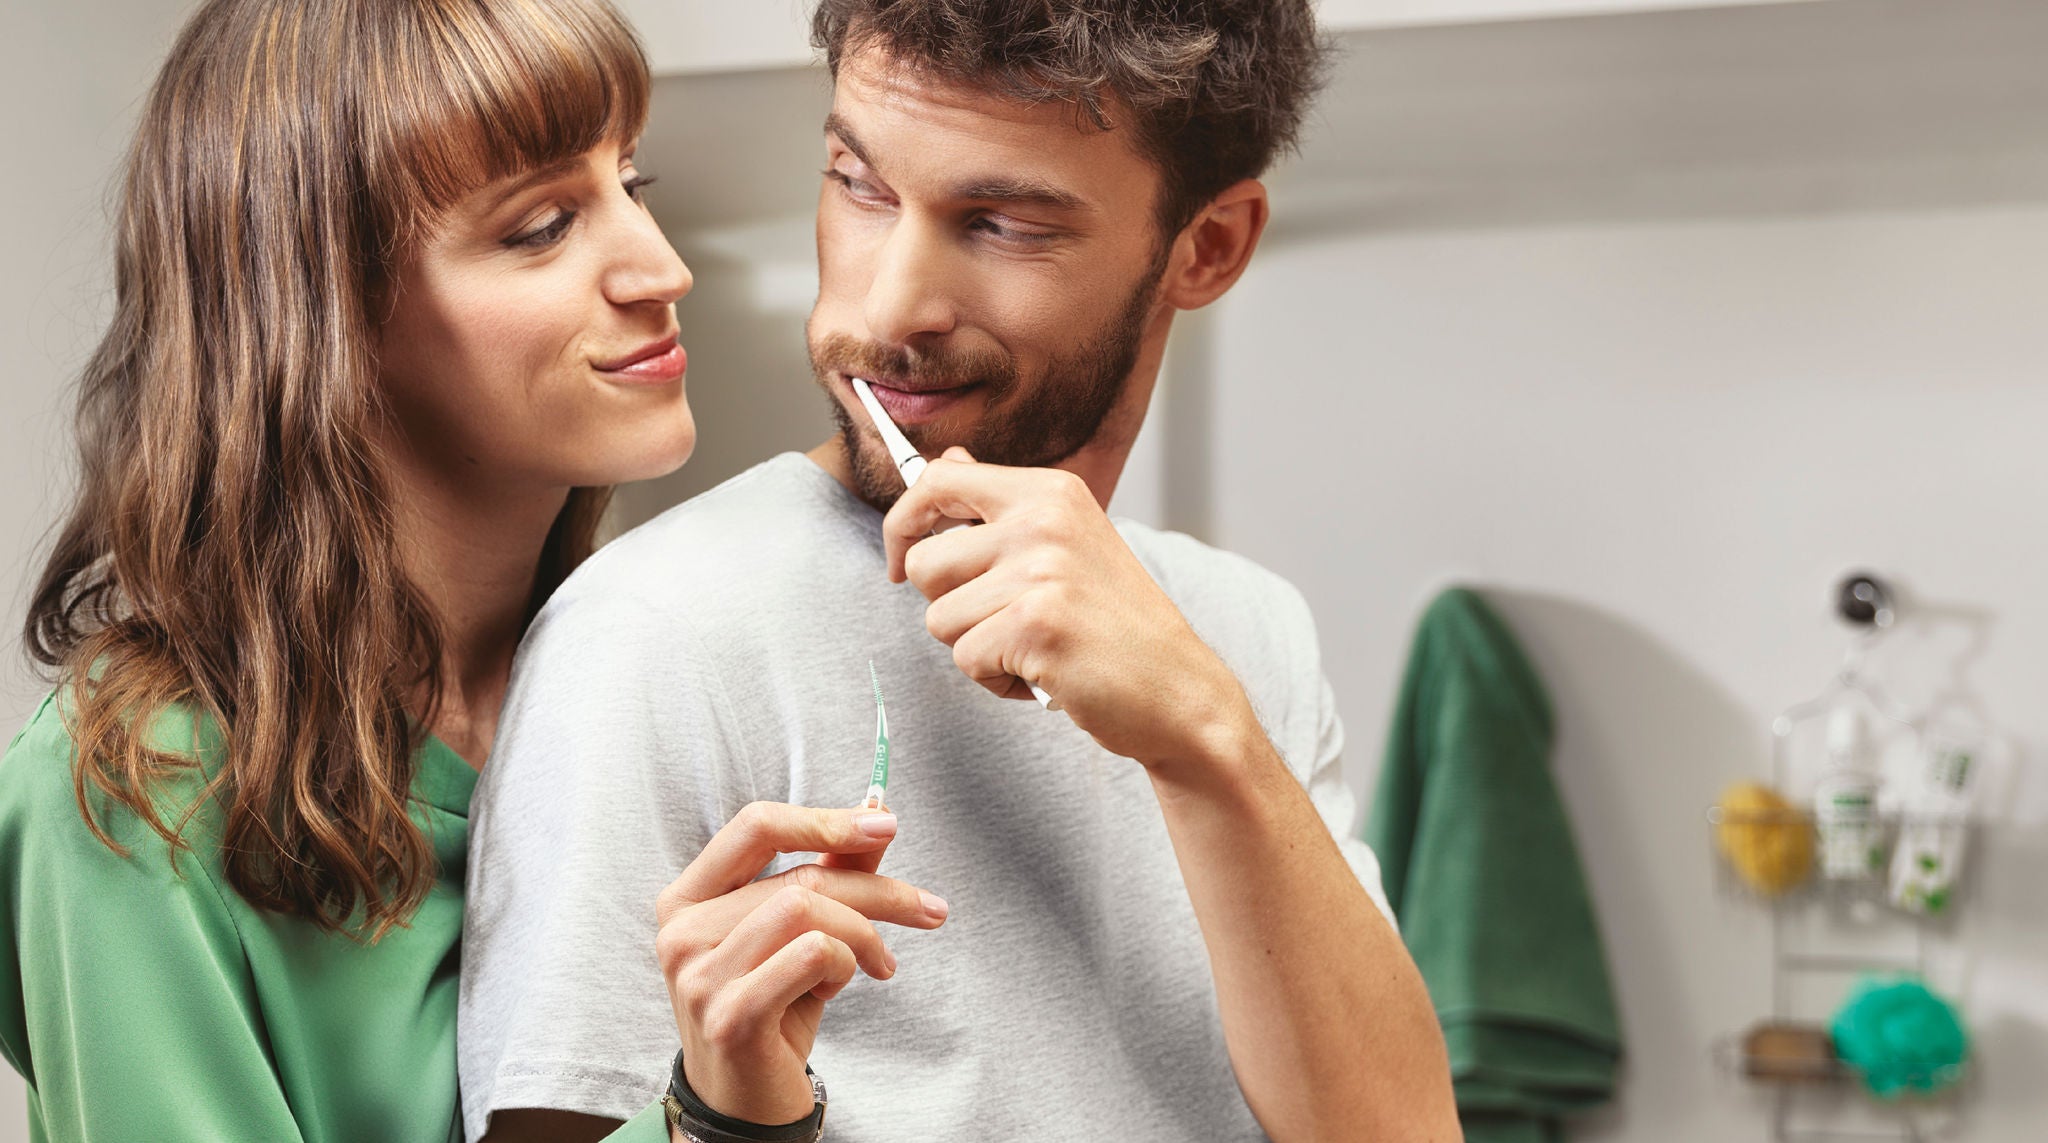 Smiling couple in the bathroom for their oral care routine, while the boy brushes his teeth with the GUM SONIC DAILY Battery Toothbrush, the girl holds the GUM SOFT PICKS Advanced interdental